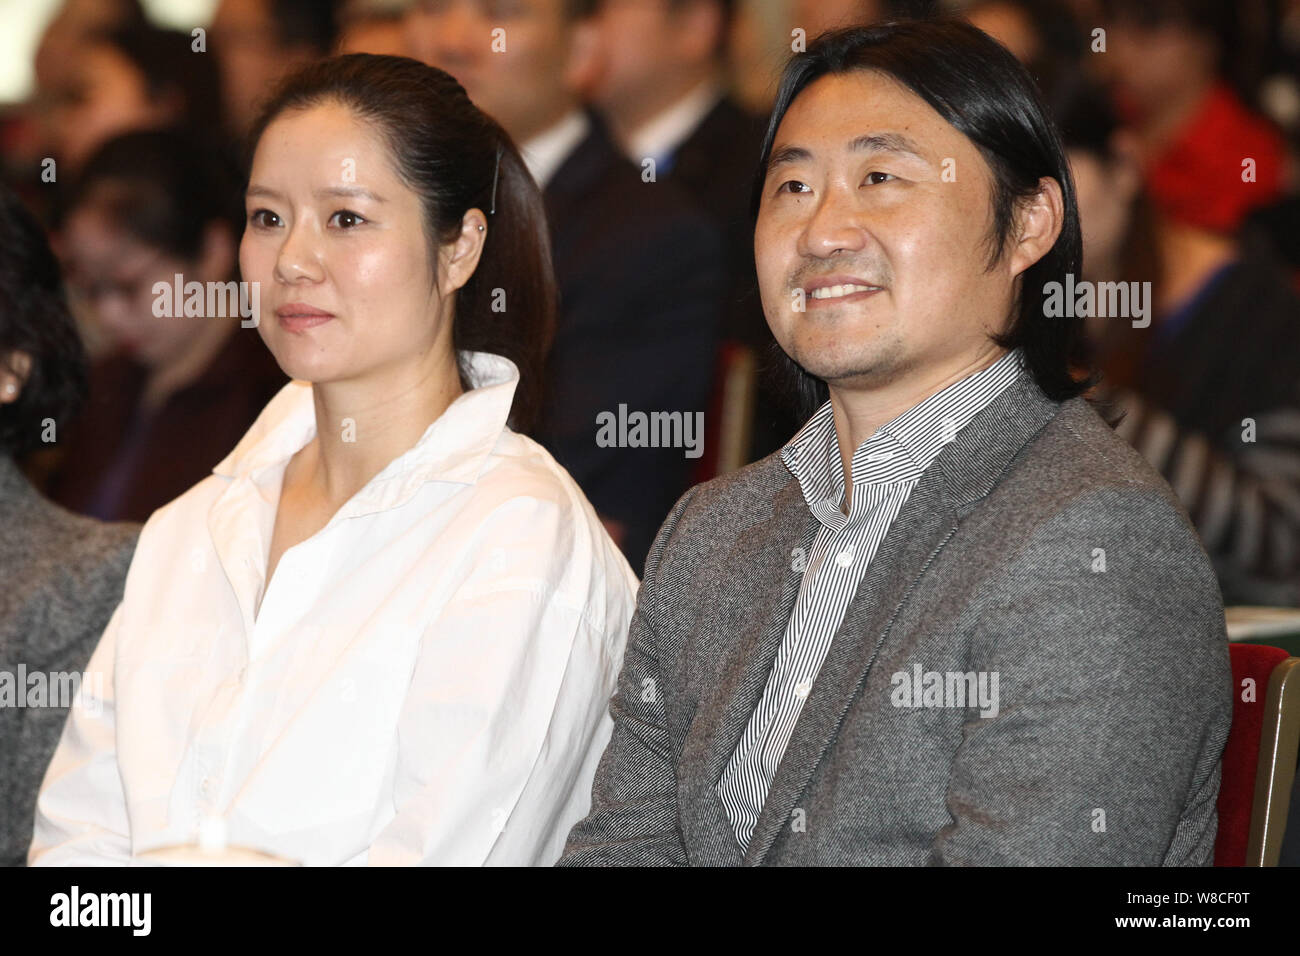 Retired Chinese tennis star Li Na, left, and her husband Jiang Shan attend a charity event for pregnant women in Beijing, China, 26 March 2015. Stock Photo